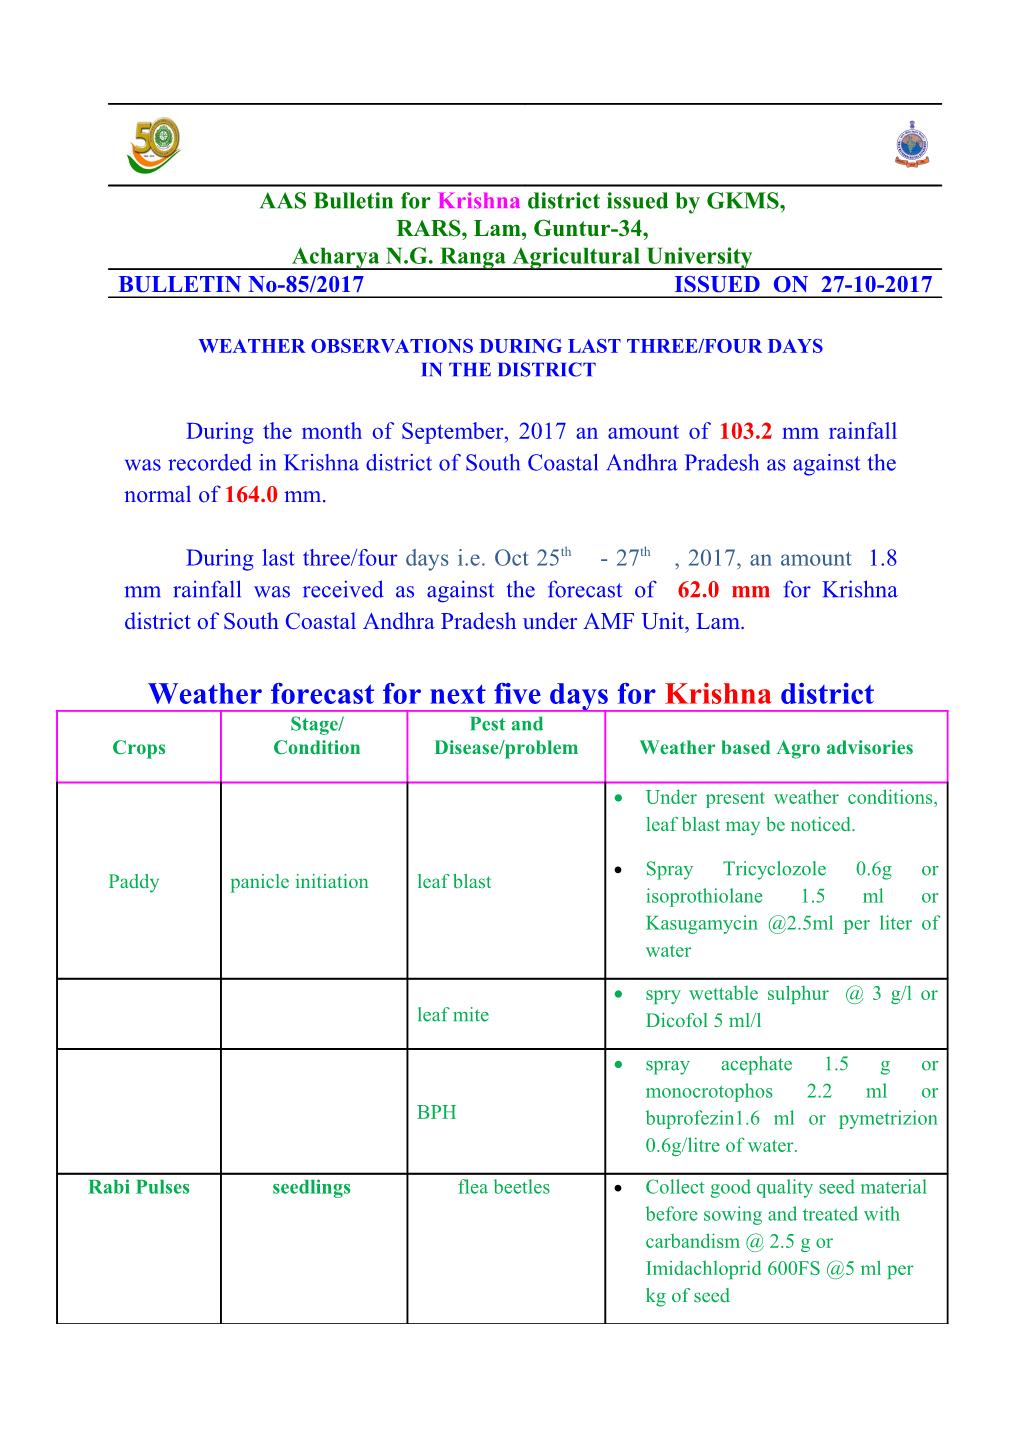 AAS Bulletin for Kurnool District Issued by IAAS, ARS, Anantapur